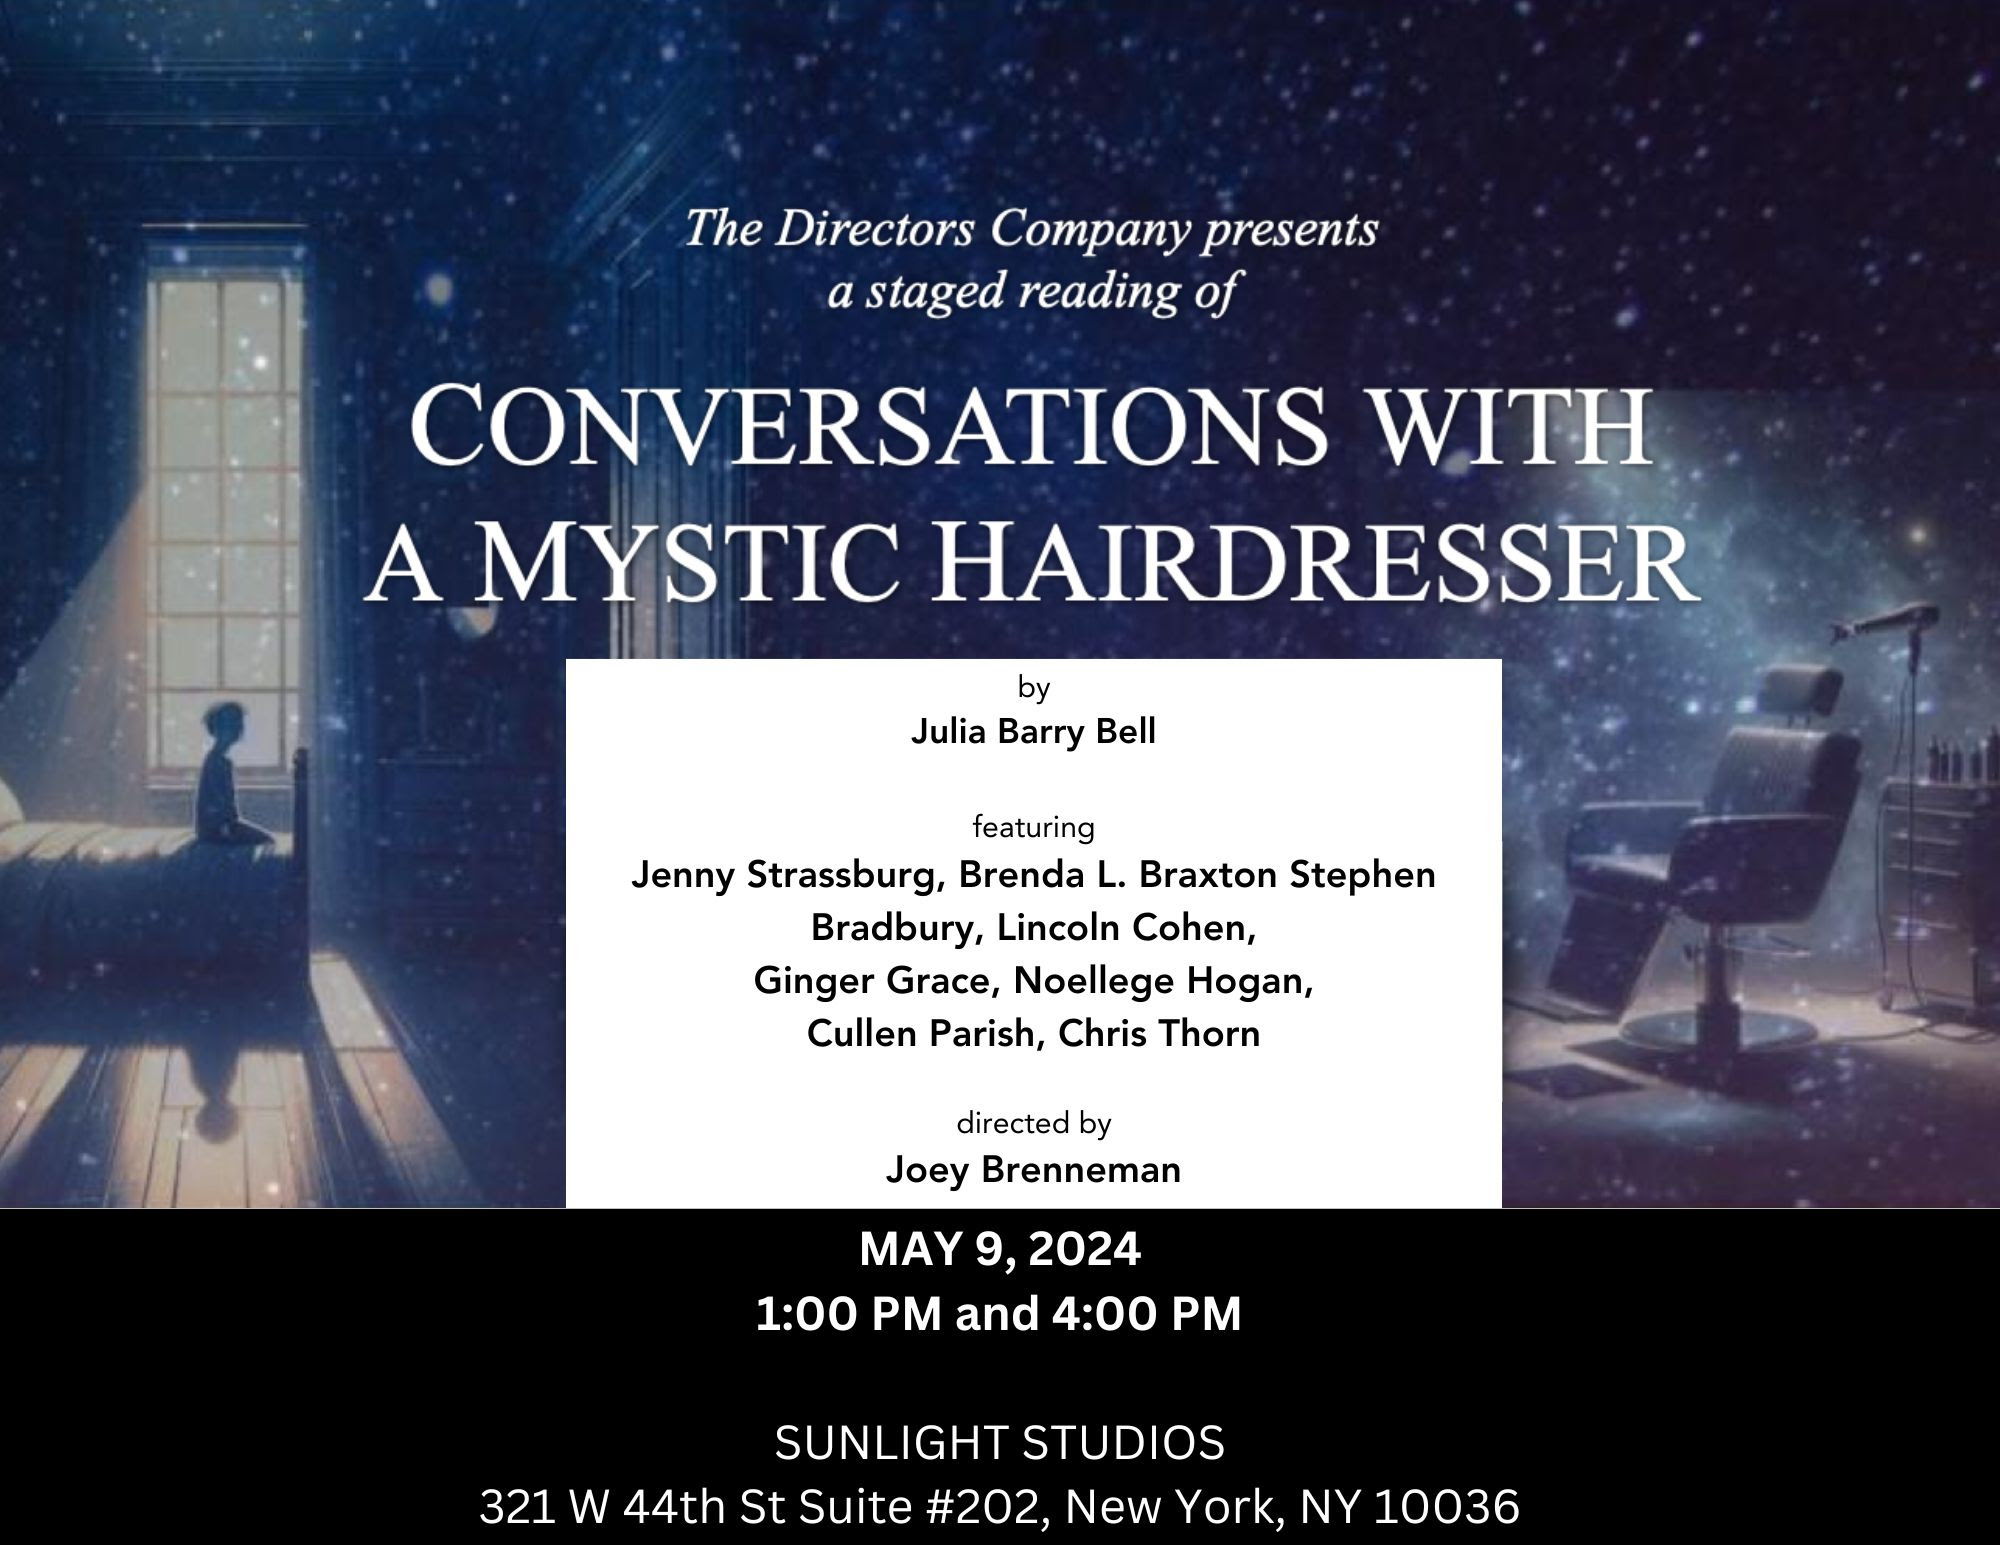 Conversations with a Mystic Hairdresser